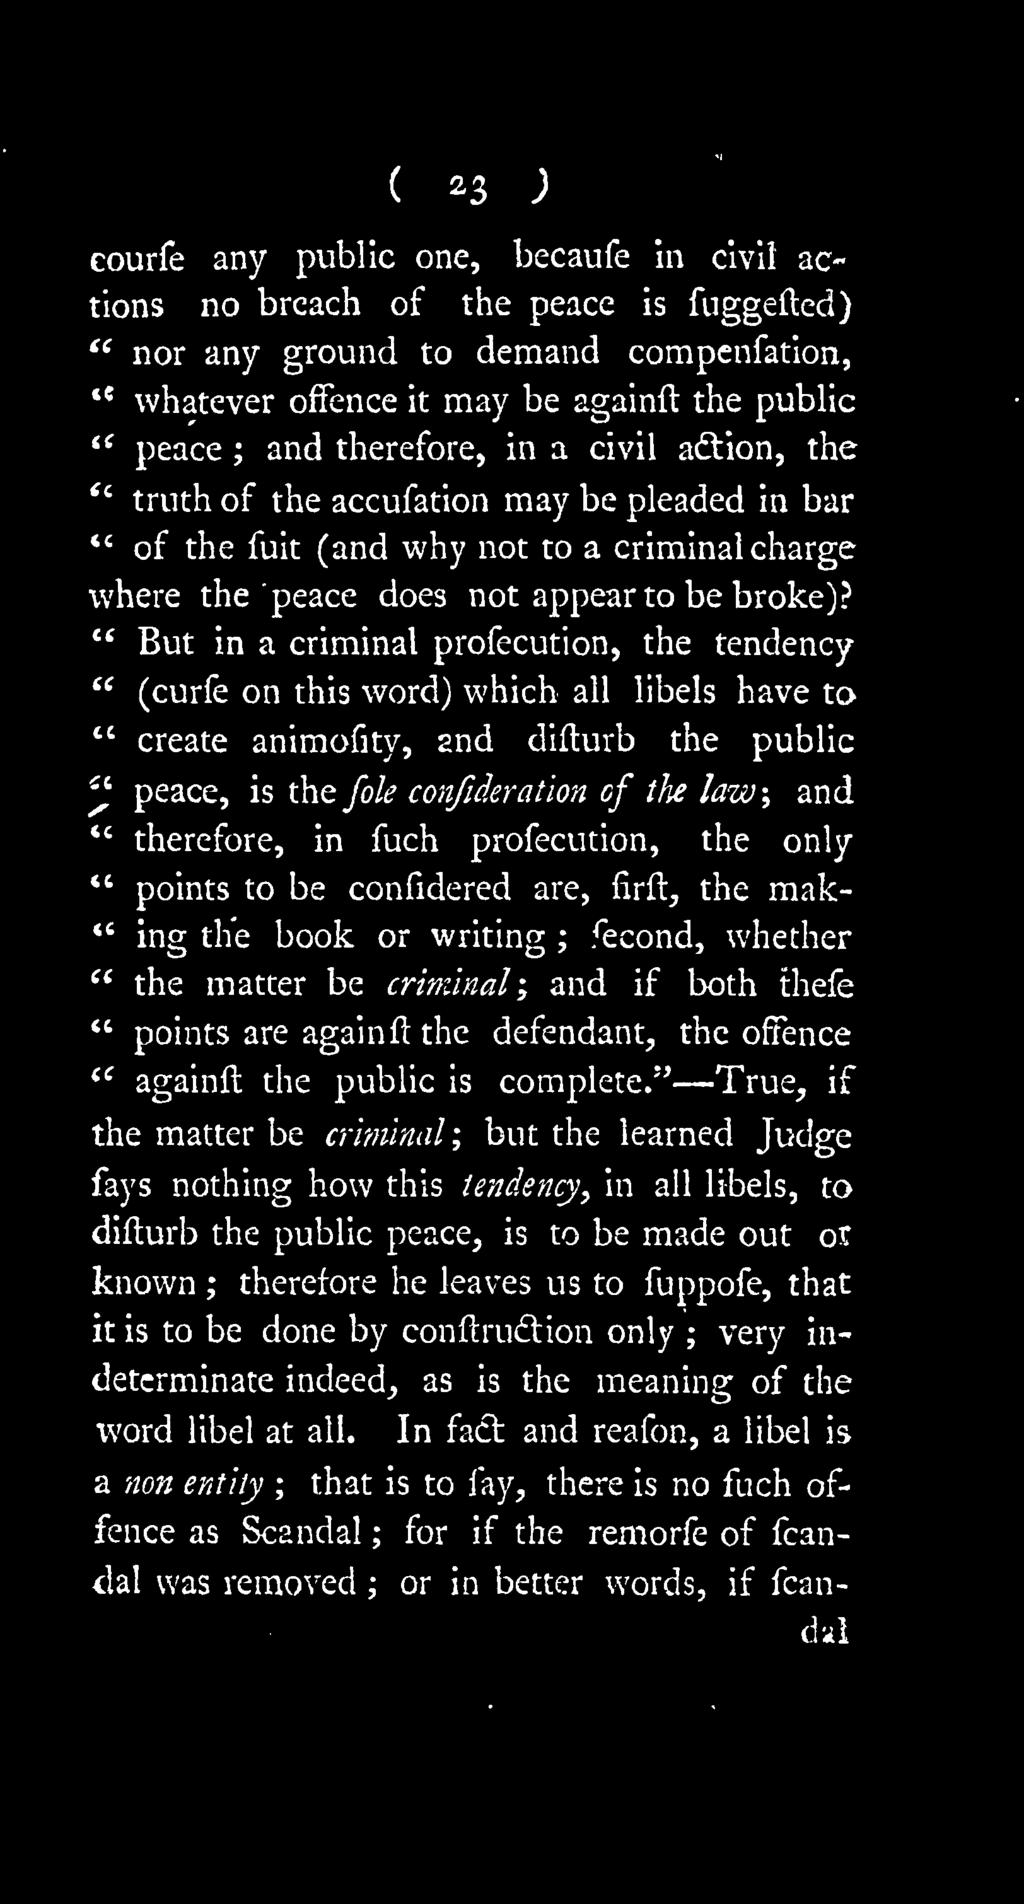 " But in a criminal profecution, the tendency ** (curfe on this word) which all libels have to " create animofity, 2nd difturb the public '' peace, is the fole confideration of the law, and *'